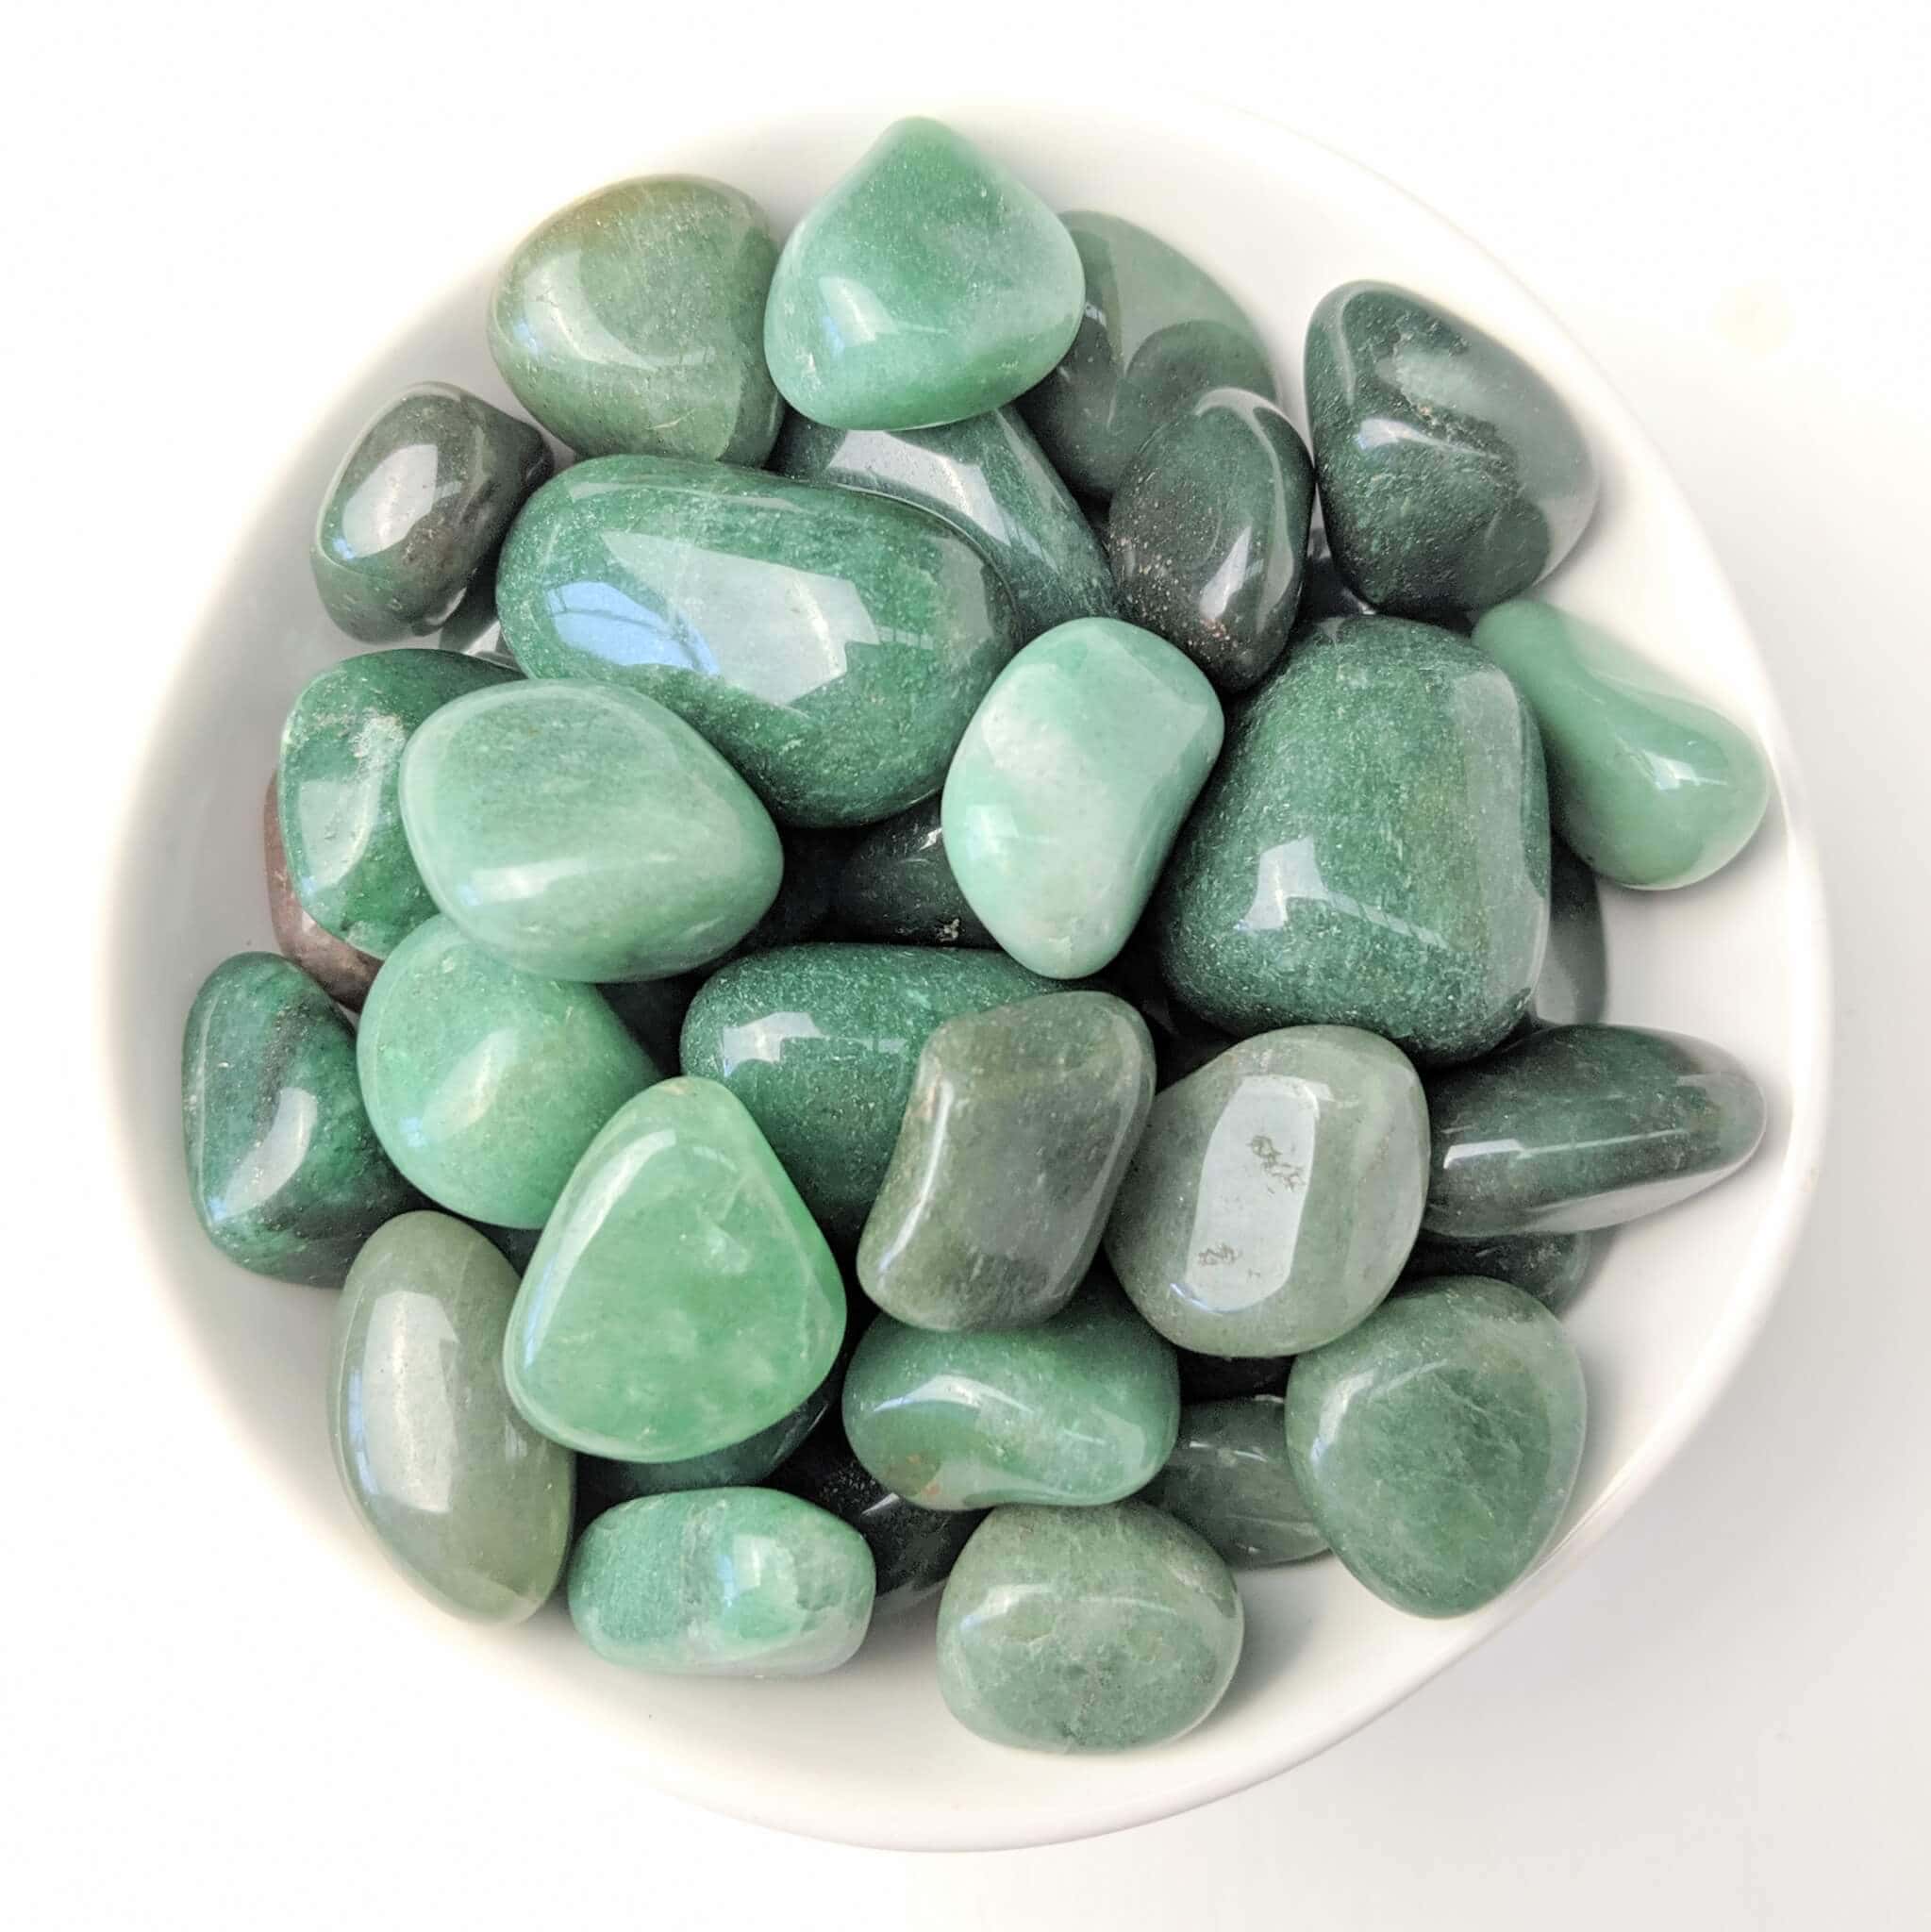 Aventurine Green Crystal Tumble Stones in a White Bowl Top View